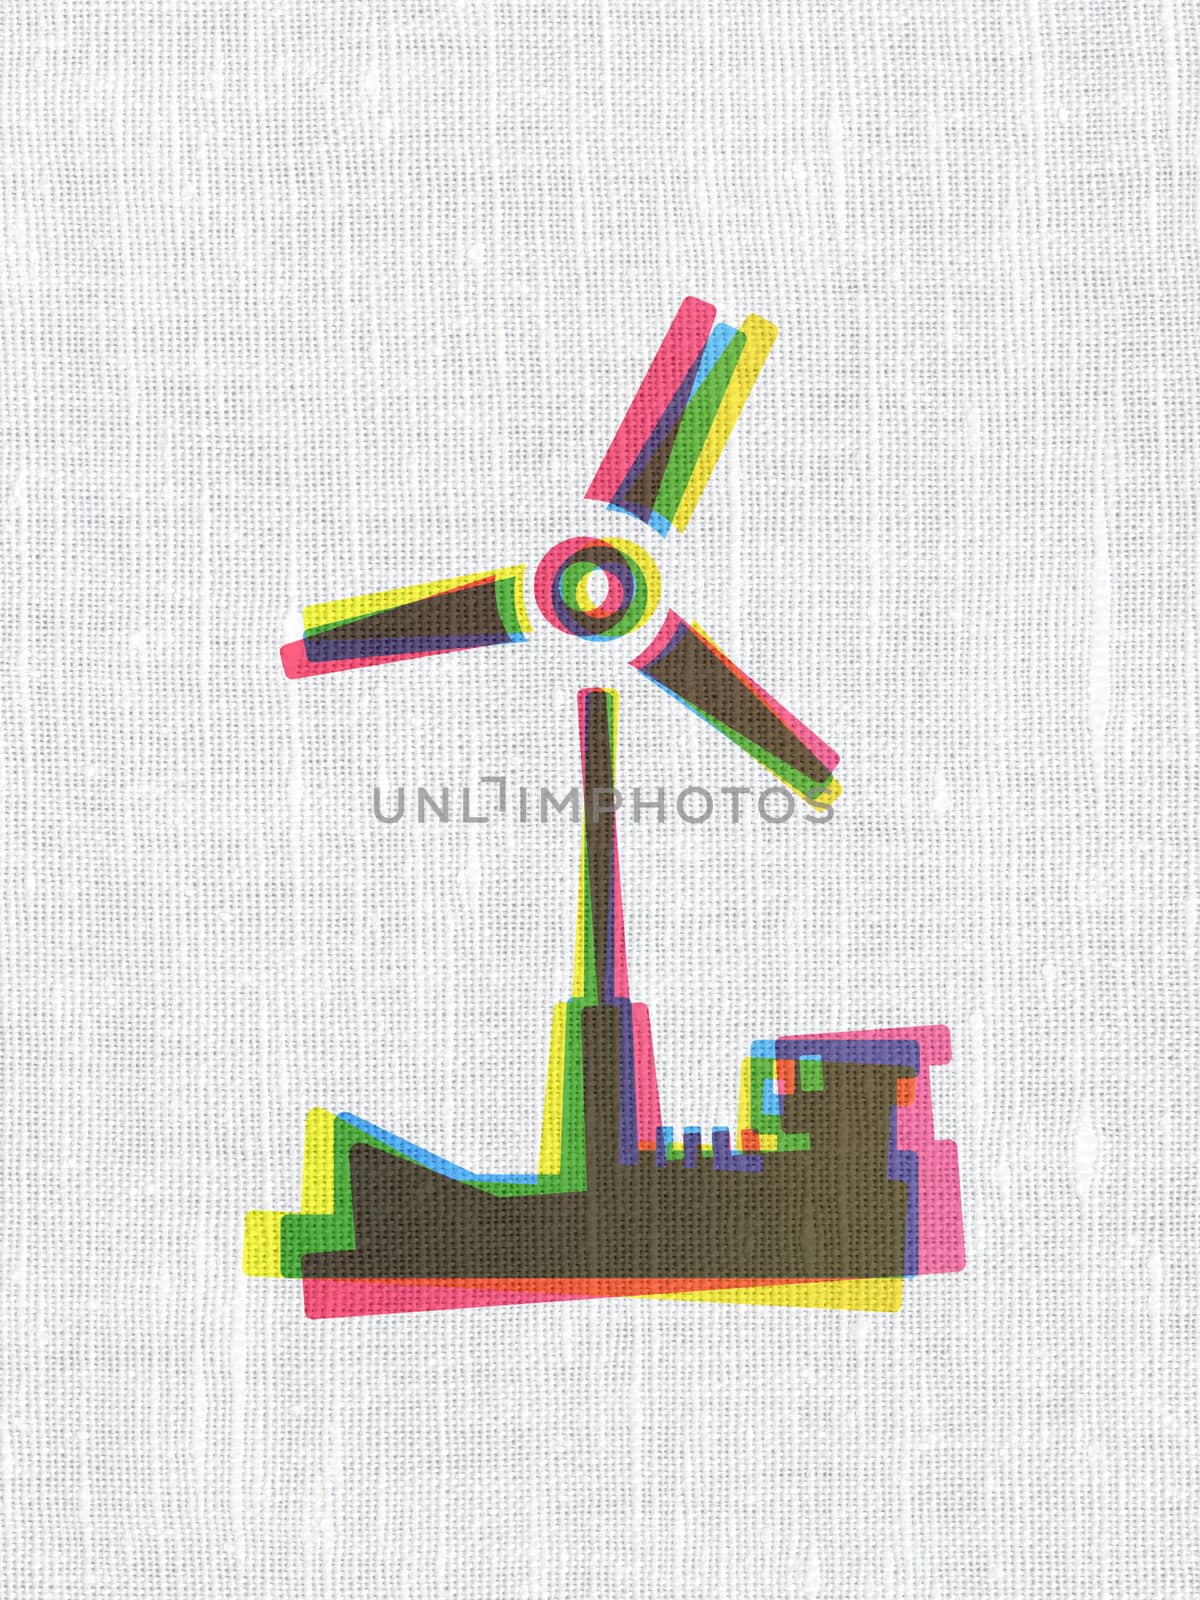 Industry concept: Windmill on fabric texture background by maxkabakov